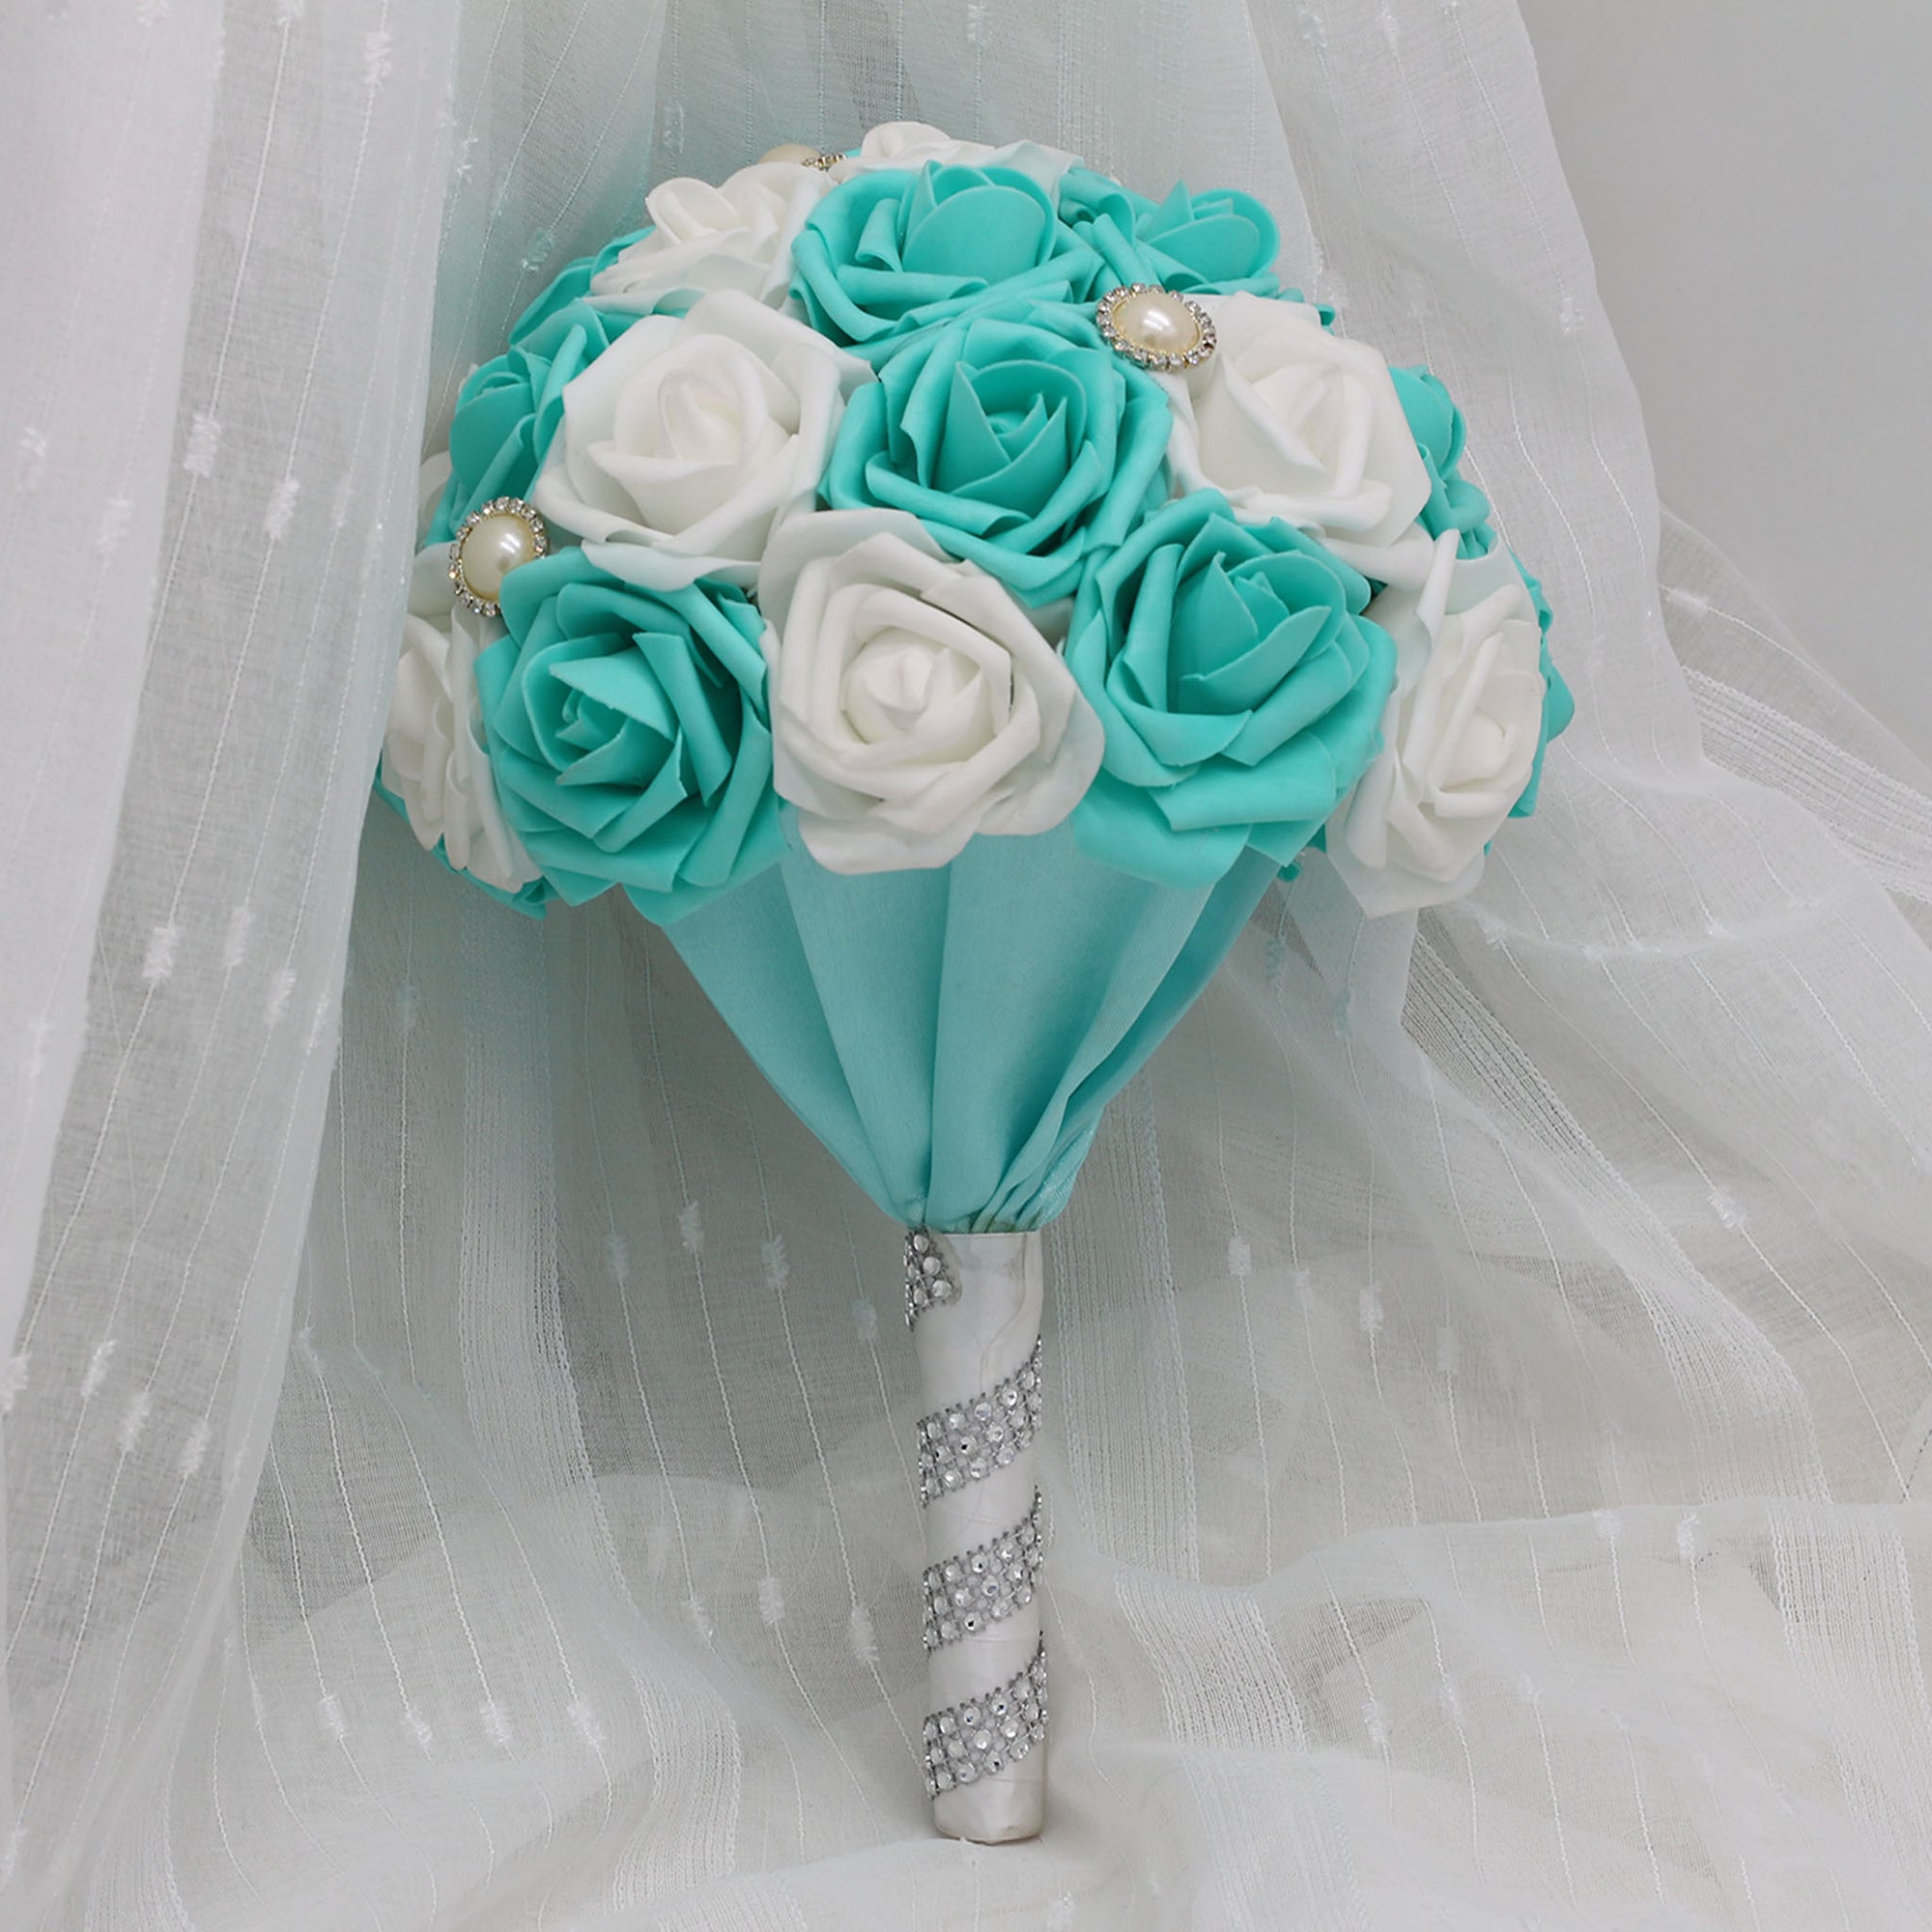 Bridal Flower Bouquet Teal and White Roses Artificial Bouquet